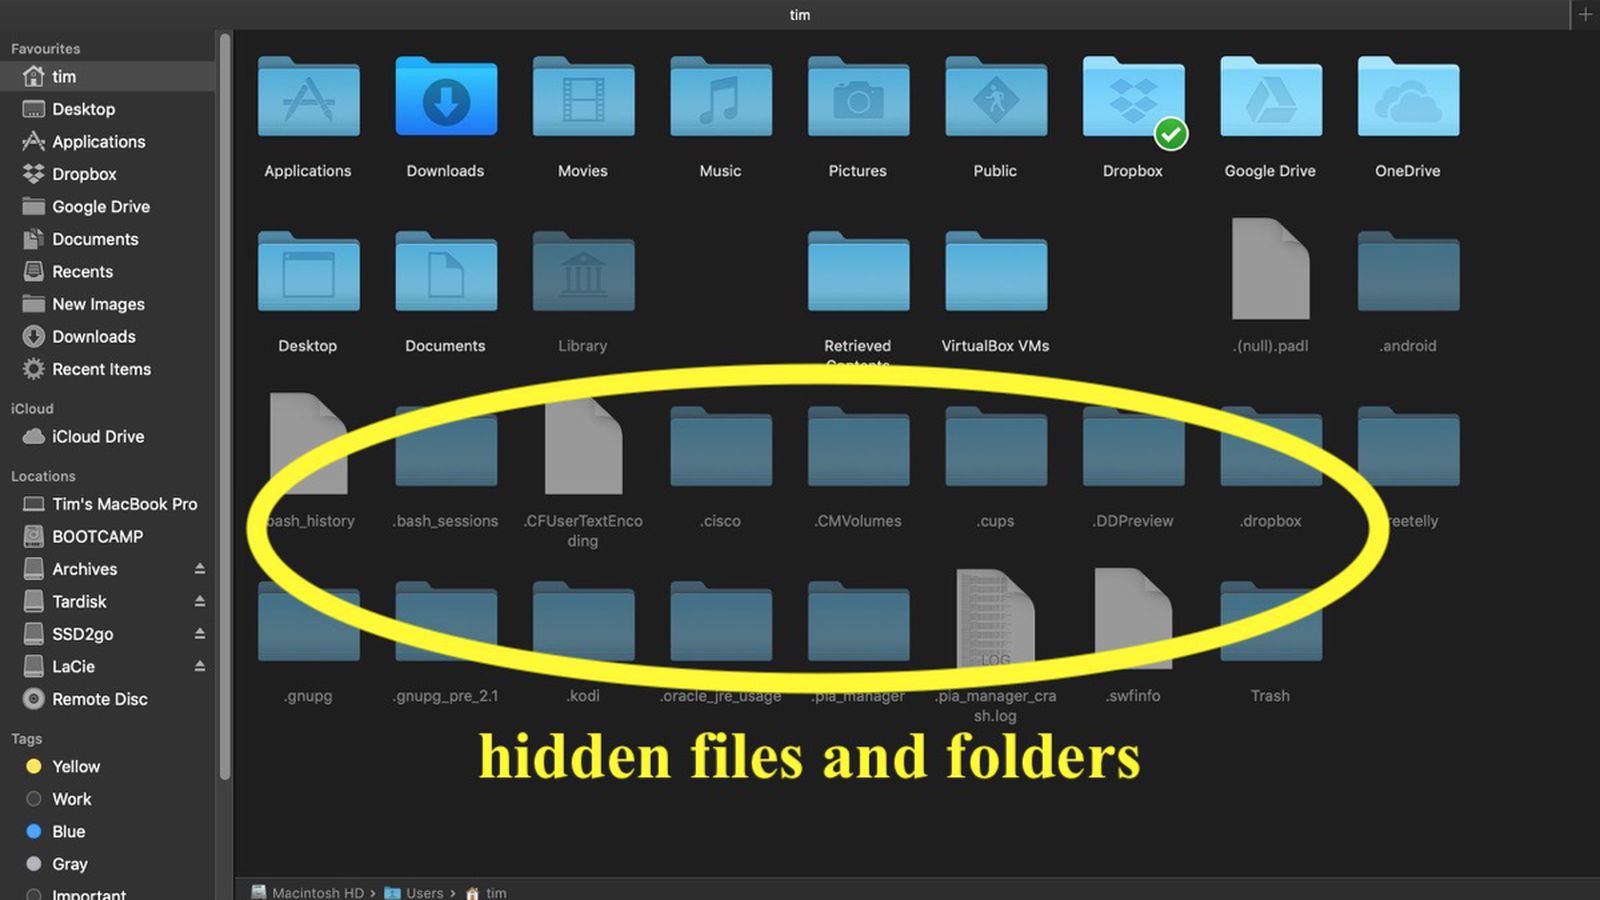 How To Show Or Hide Hidden Files And Folders On Mac